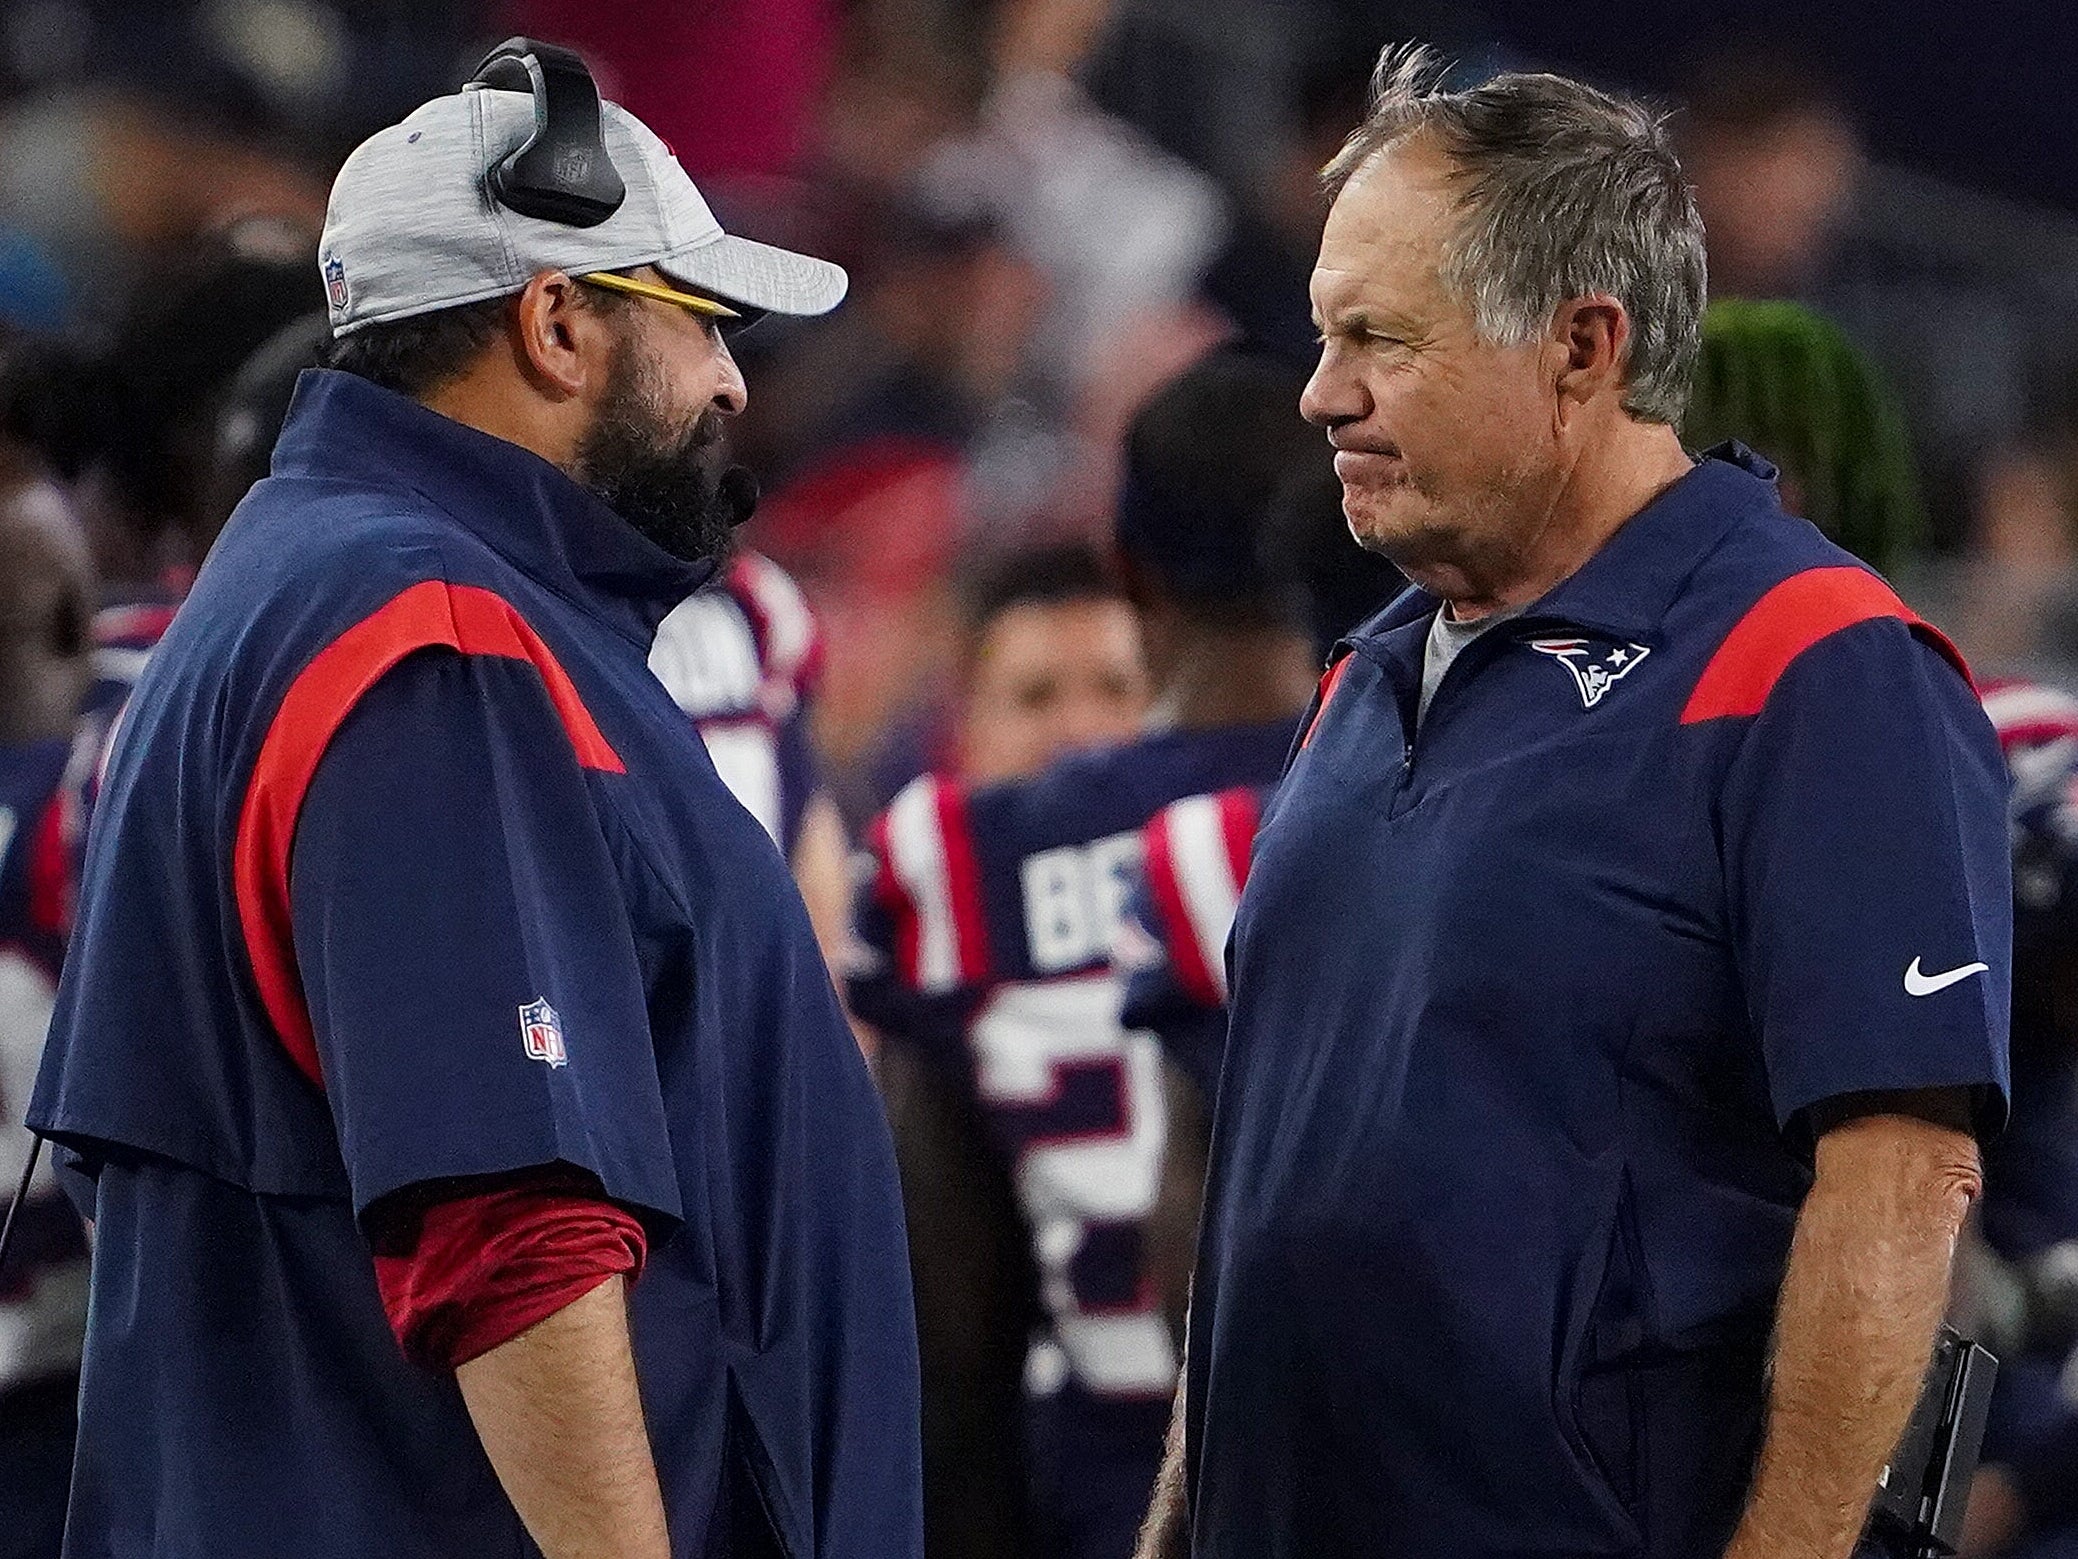 Matt Patricia, senior football advisor/offensive line, and New England Patriots head coach Bill Belichick on the sidelines. The New England Patriots host the Carolina Panthers in a preseason game at Gillette Stadium in Foxborough, MA on August 19, 2022.